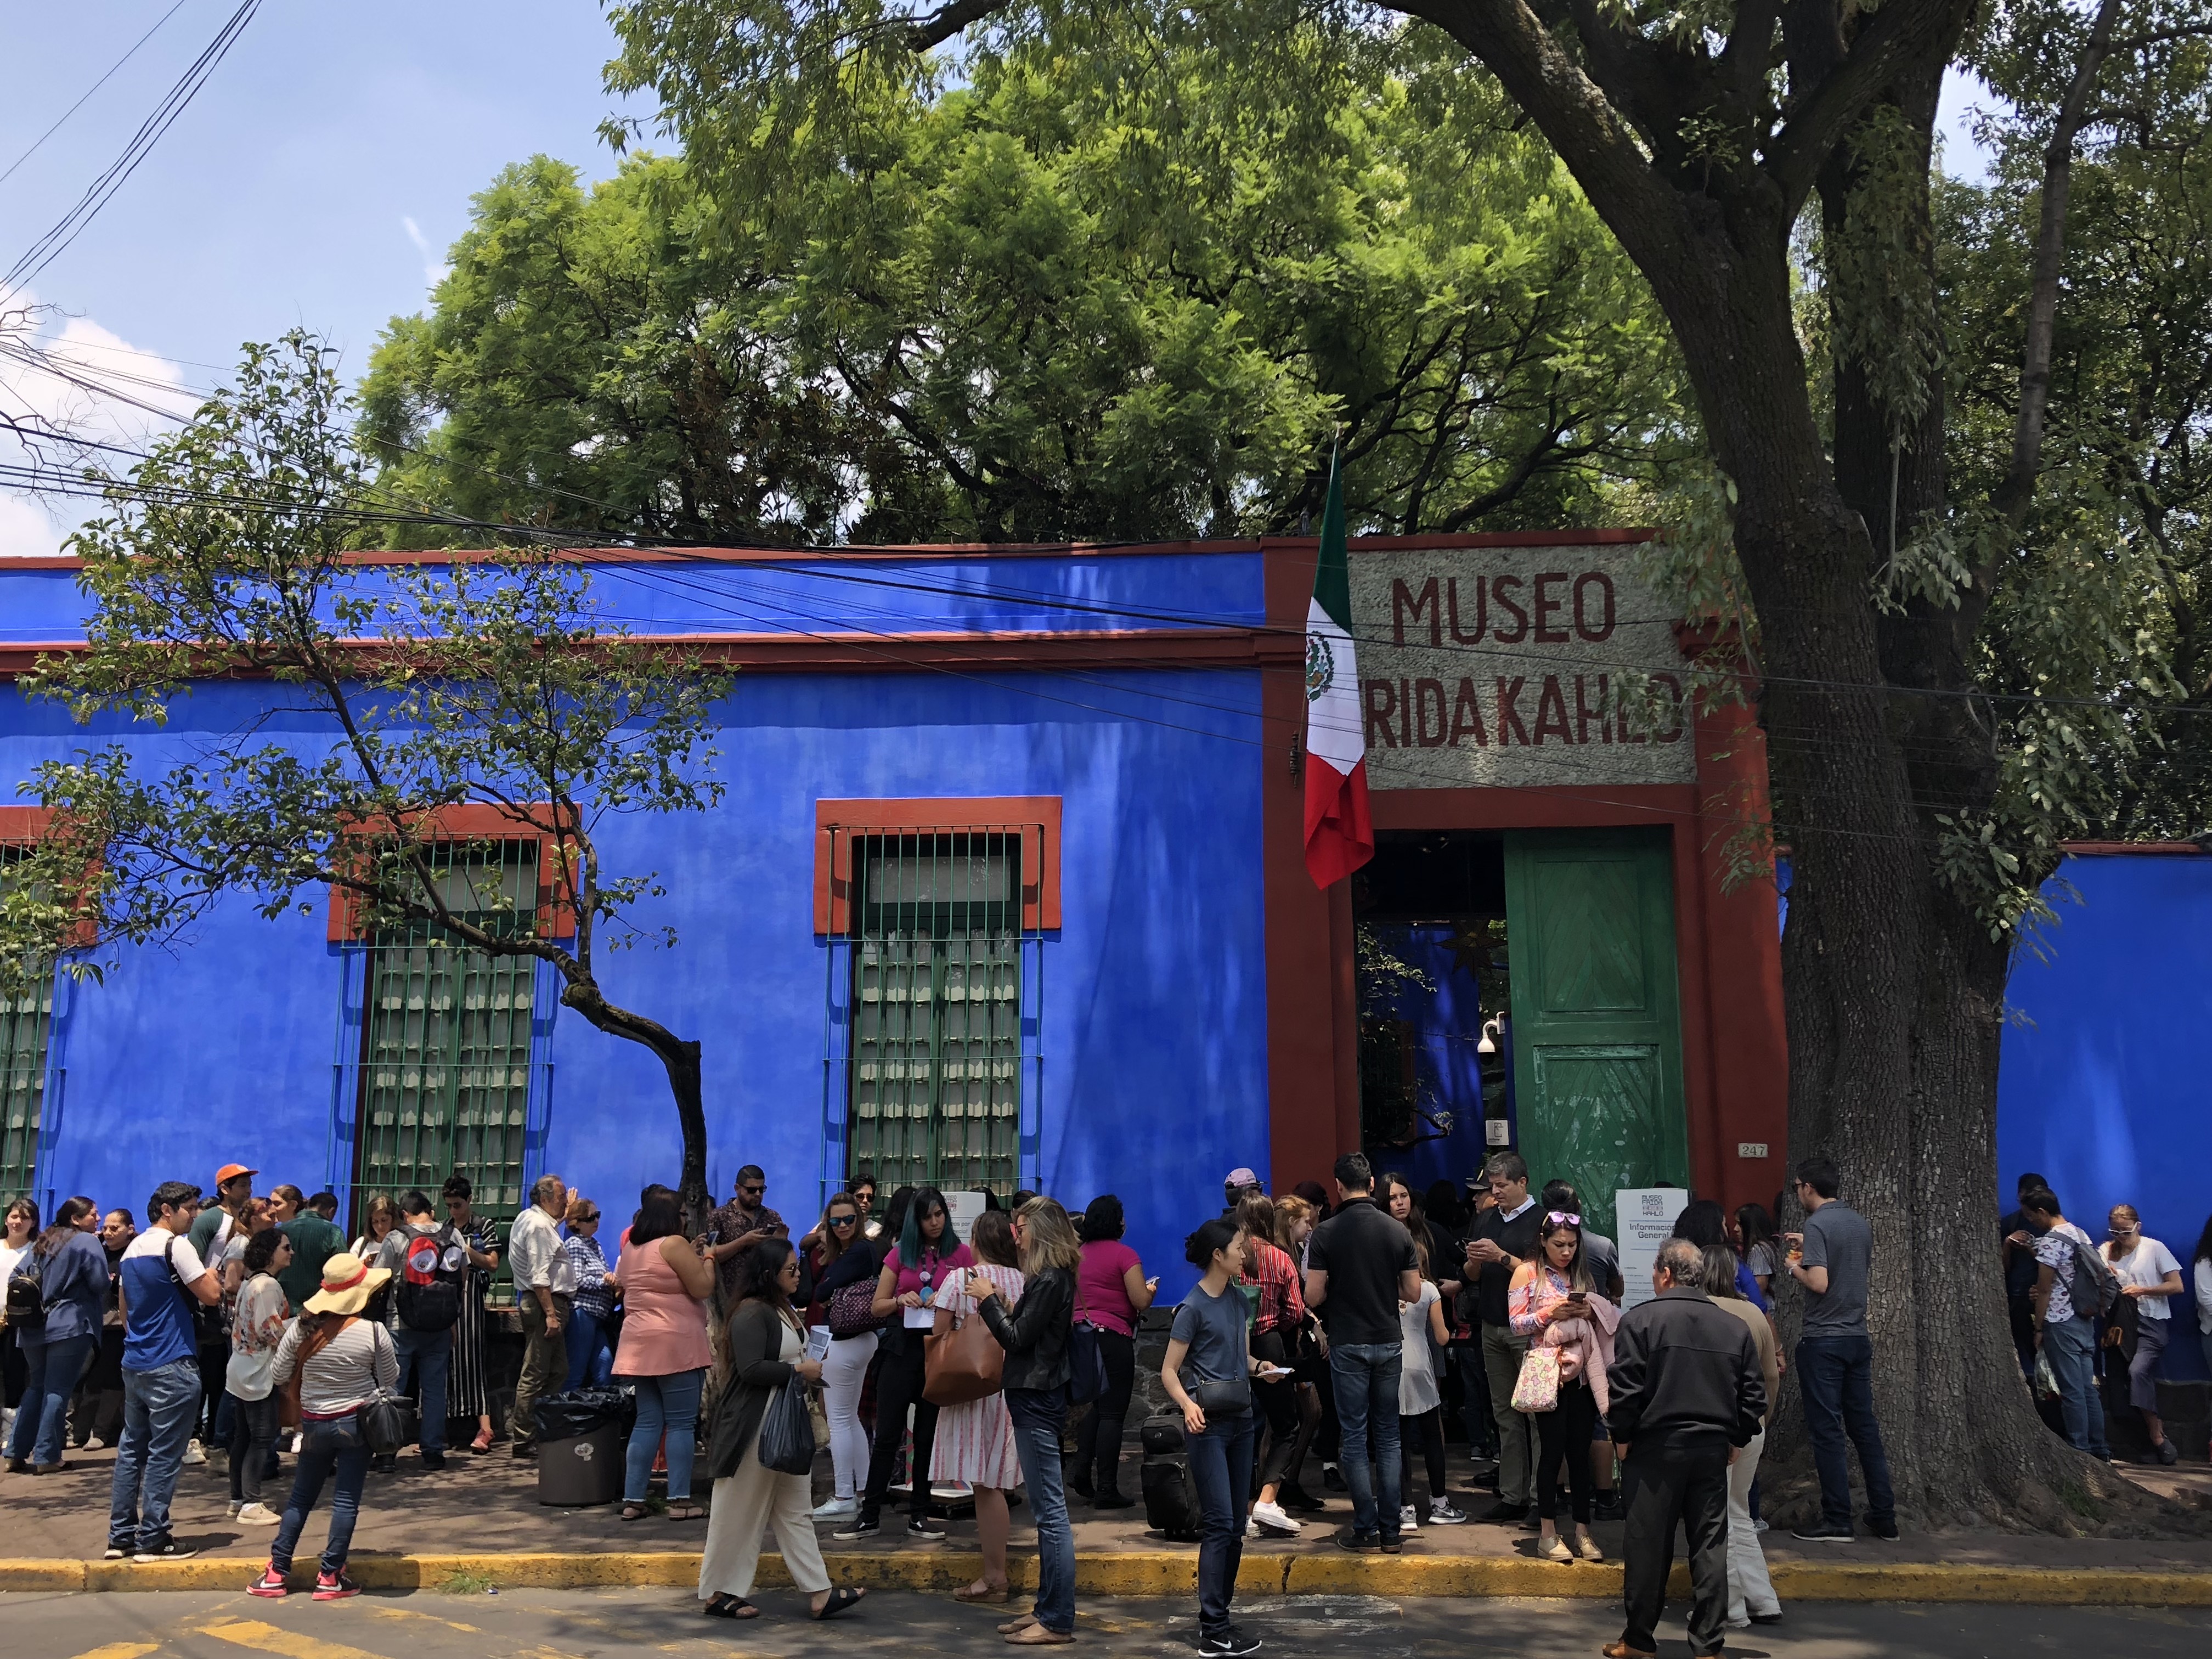 Bright blue exterior of the Frida Kahlo Museum in Mexico City